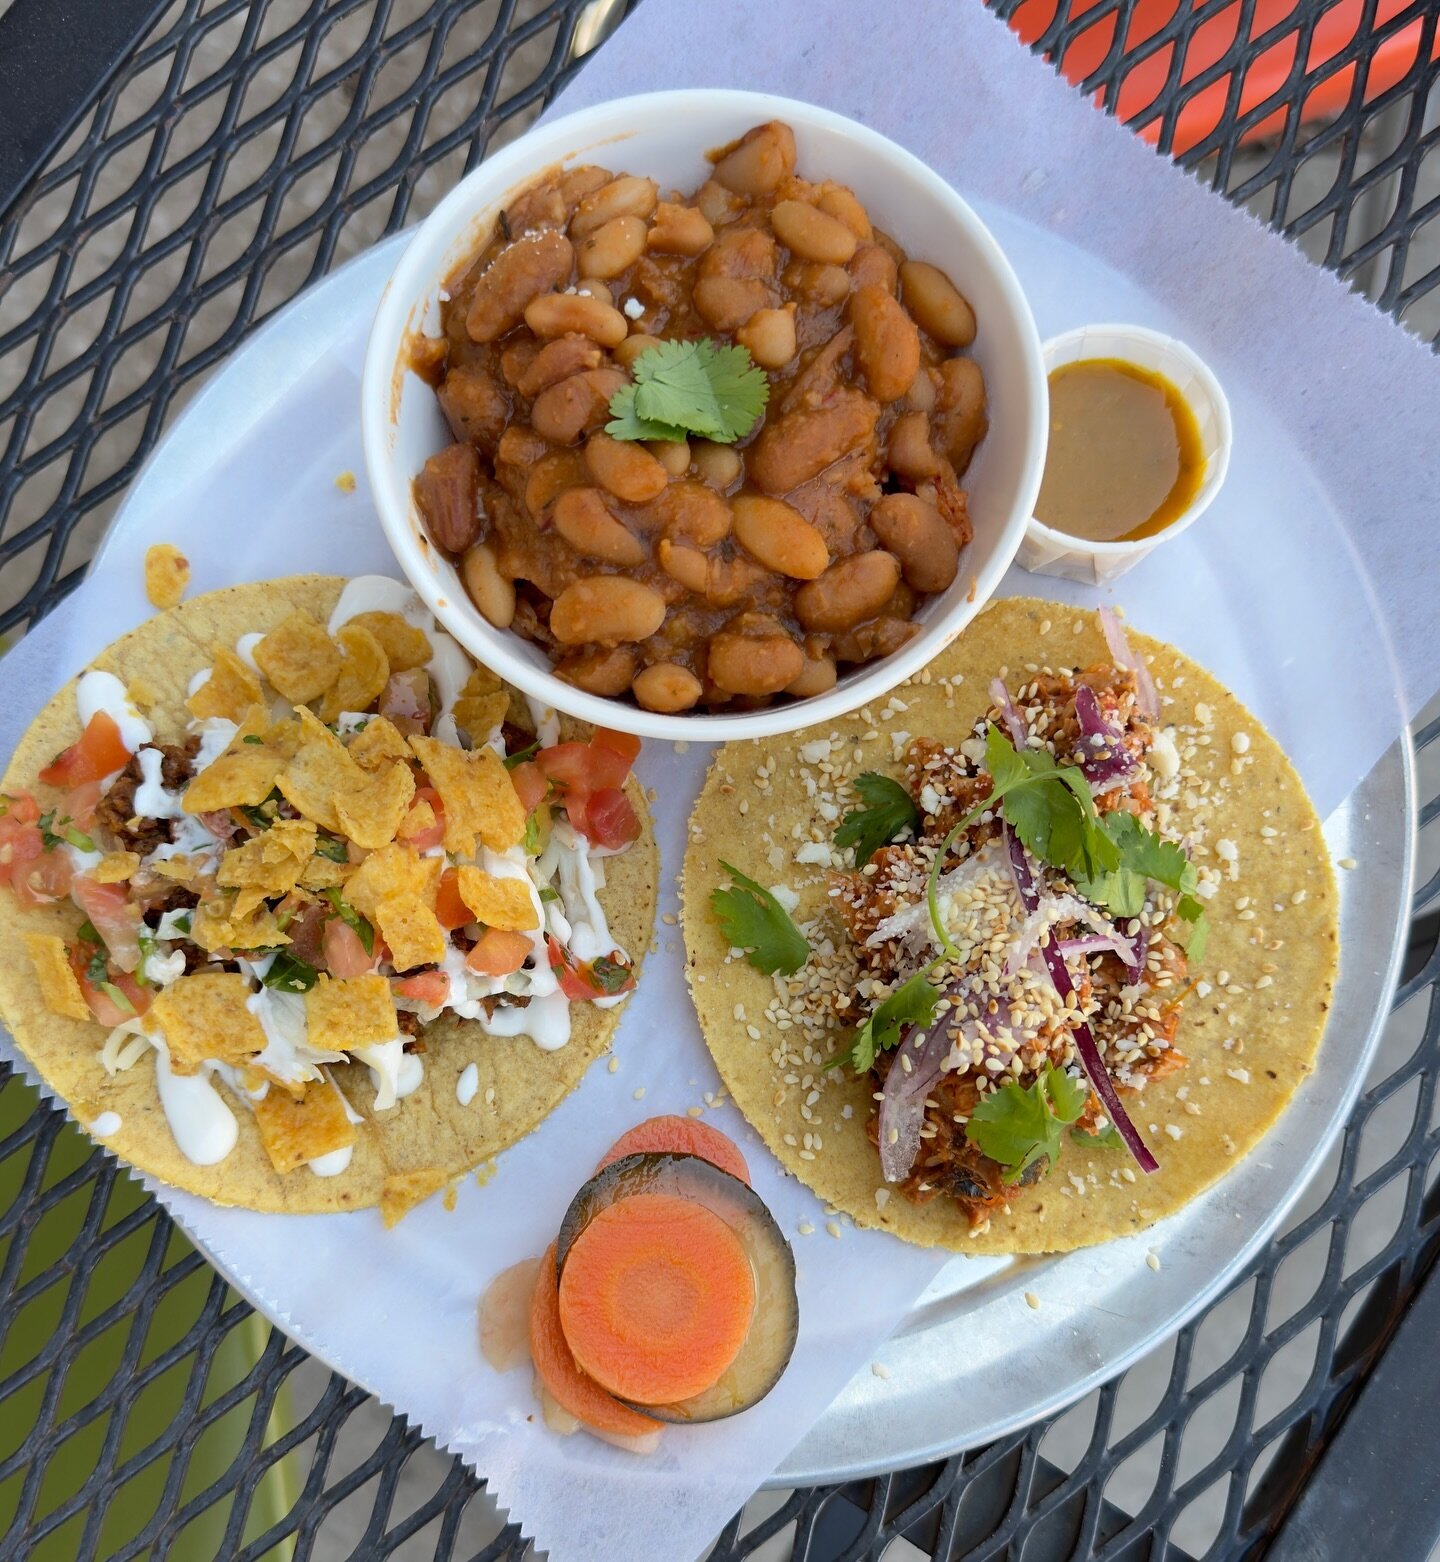 Taco Tuesday is in full swing. Come try some of your favorite fillings.